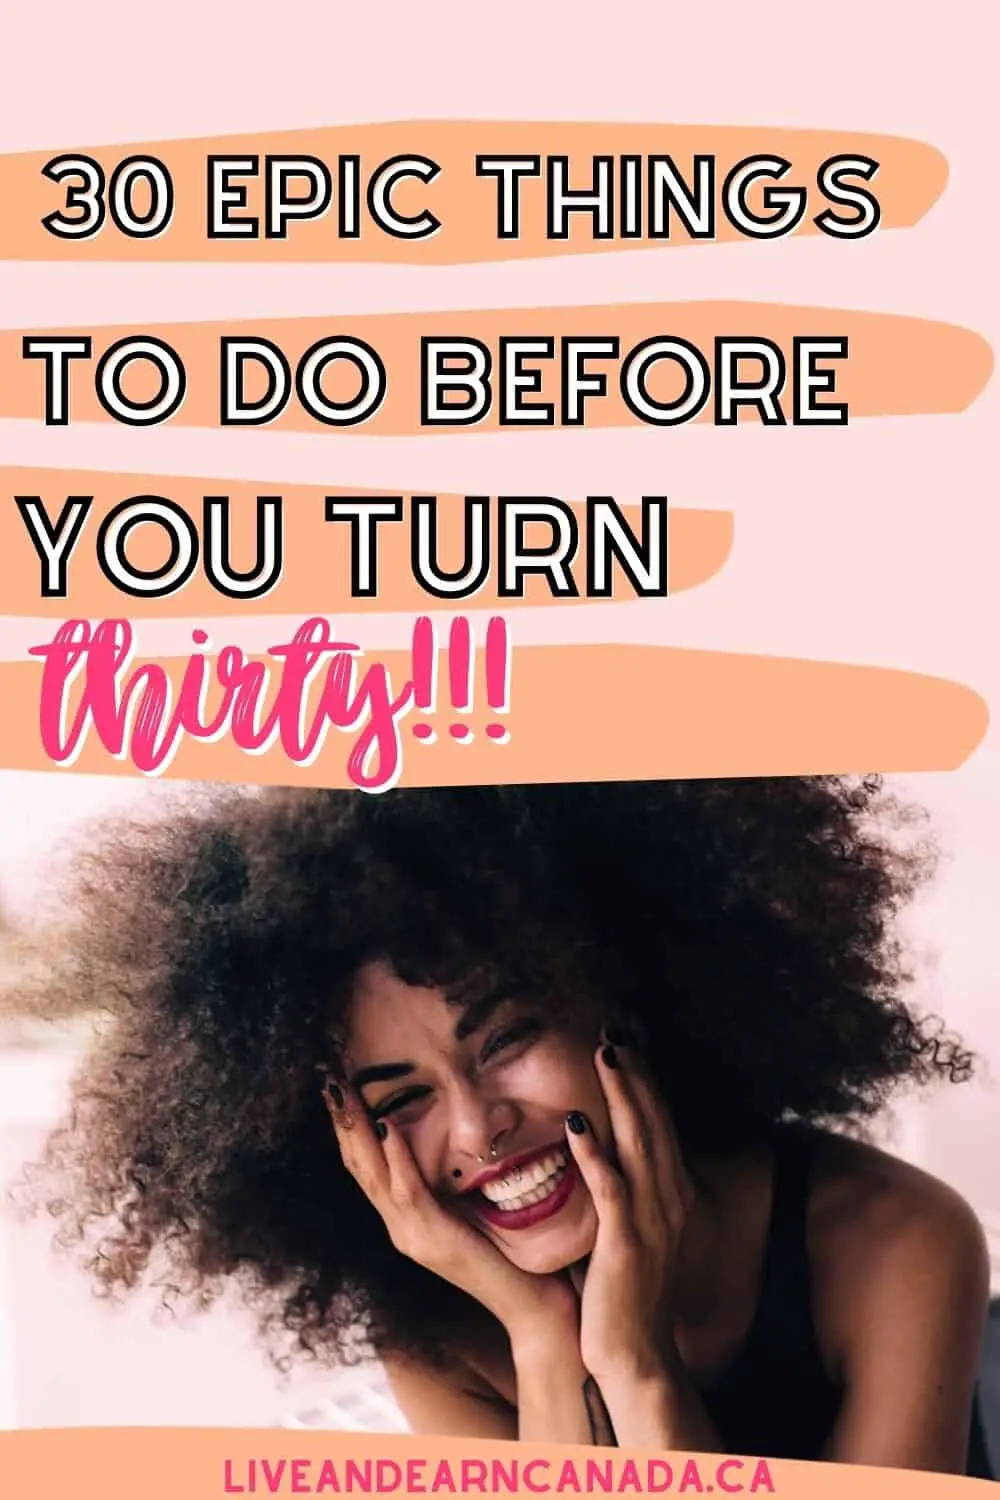 This list of 30 things to do before turning thirty might seem daunting but what better time than now? Pick one thing on this list and make it happen. You'll be surprised at how much more confident, accomplished, or happy you will feel by crossing off a few items from your bucket list early! My 30 Before 30 List. 30 things I want to do before I turn 30.